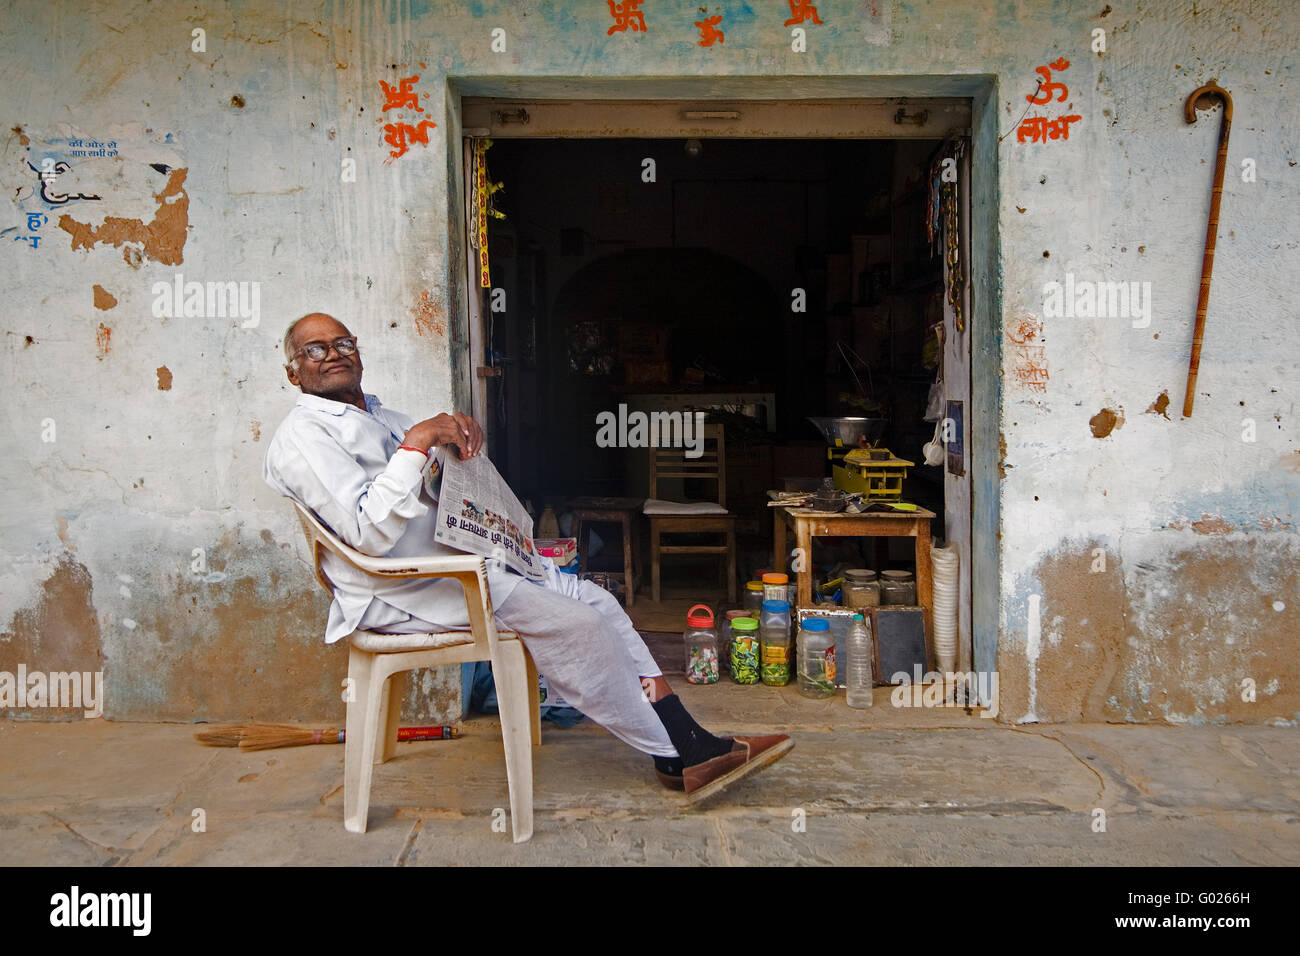 indian old man before a retail business, North India, India, Asia Stock Photo